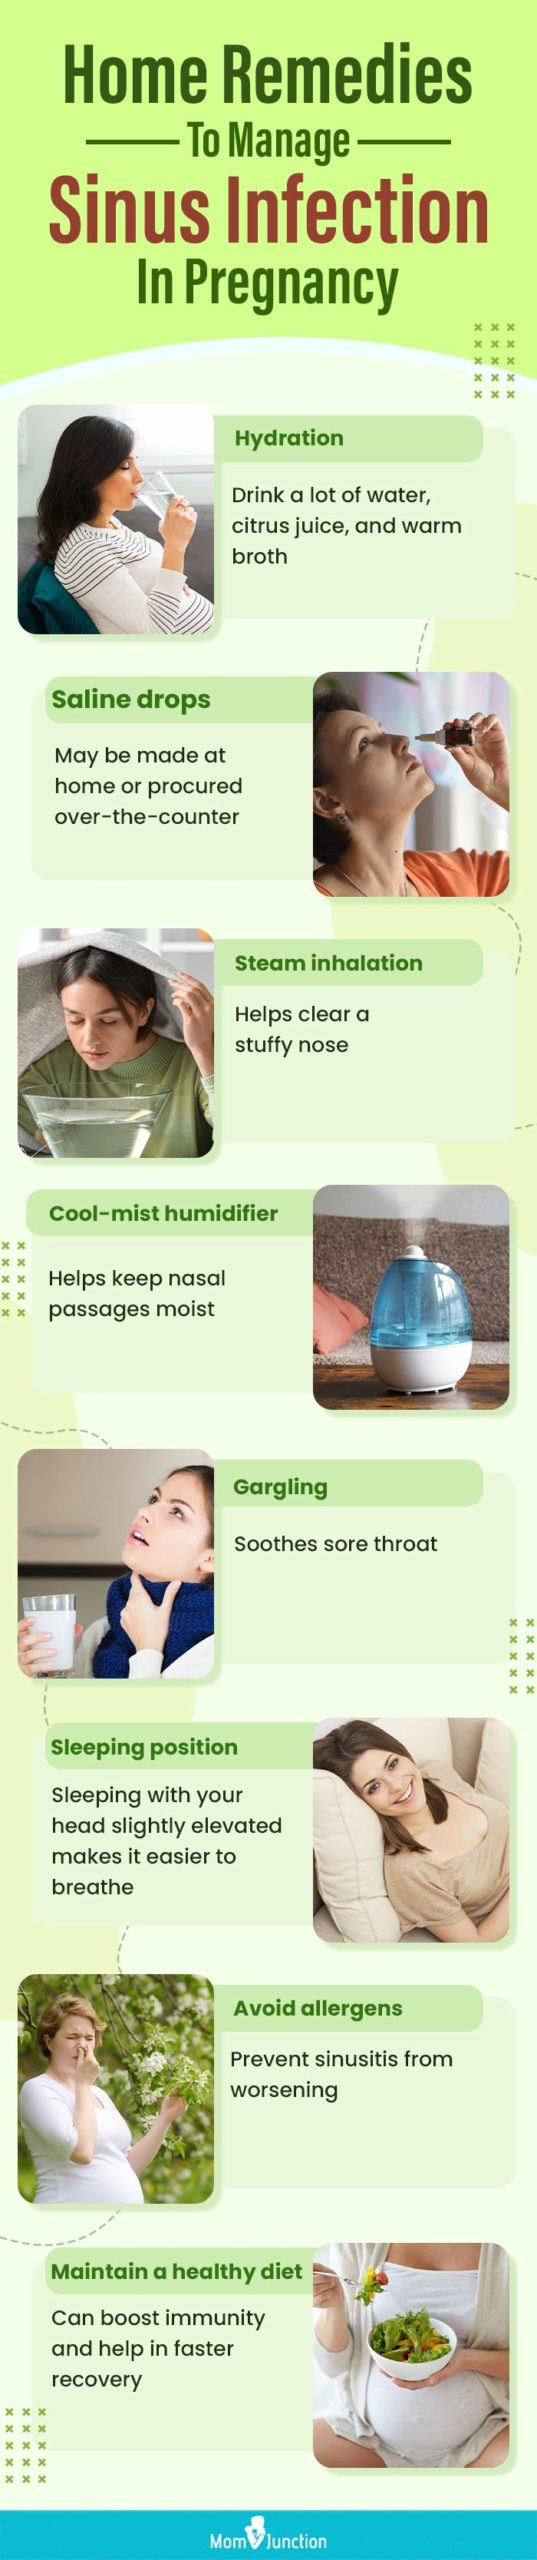 home remedies to manage sinus infection in pregnancy (infographic)